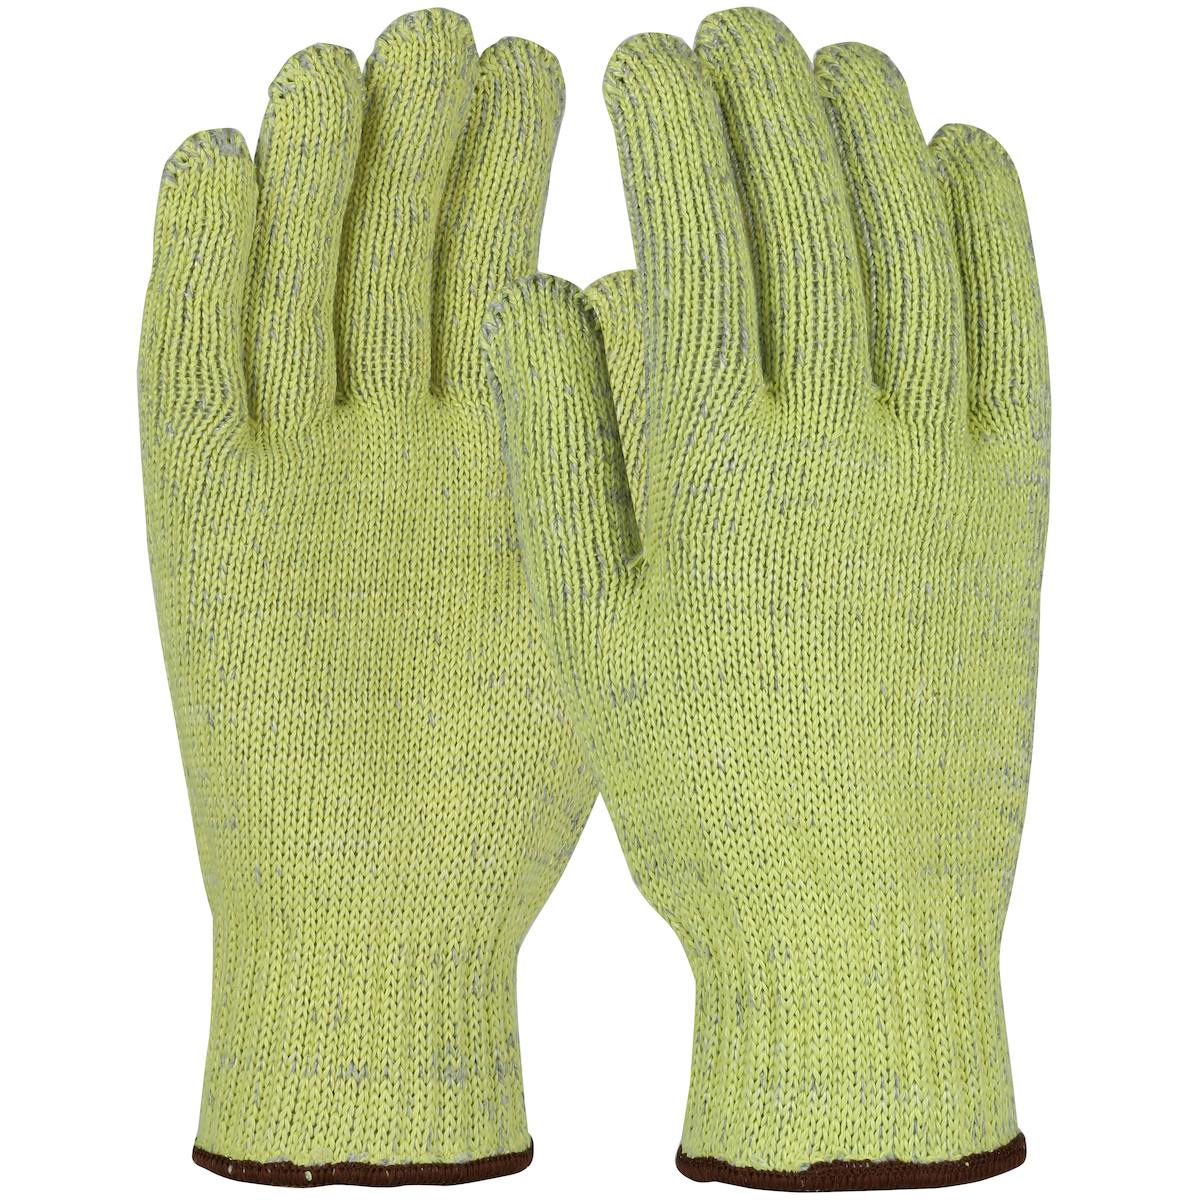 Kut Gard® Seamless Knit ATA® / Aramid Blended Glove with Cotton/Polyester Plating - Heavy Weight (MATA502)_0